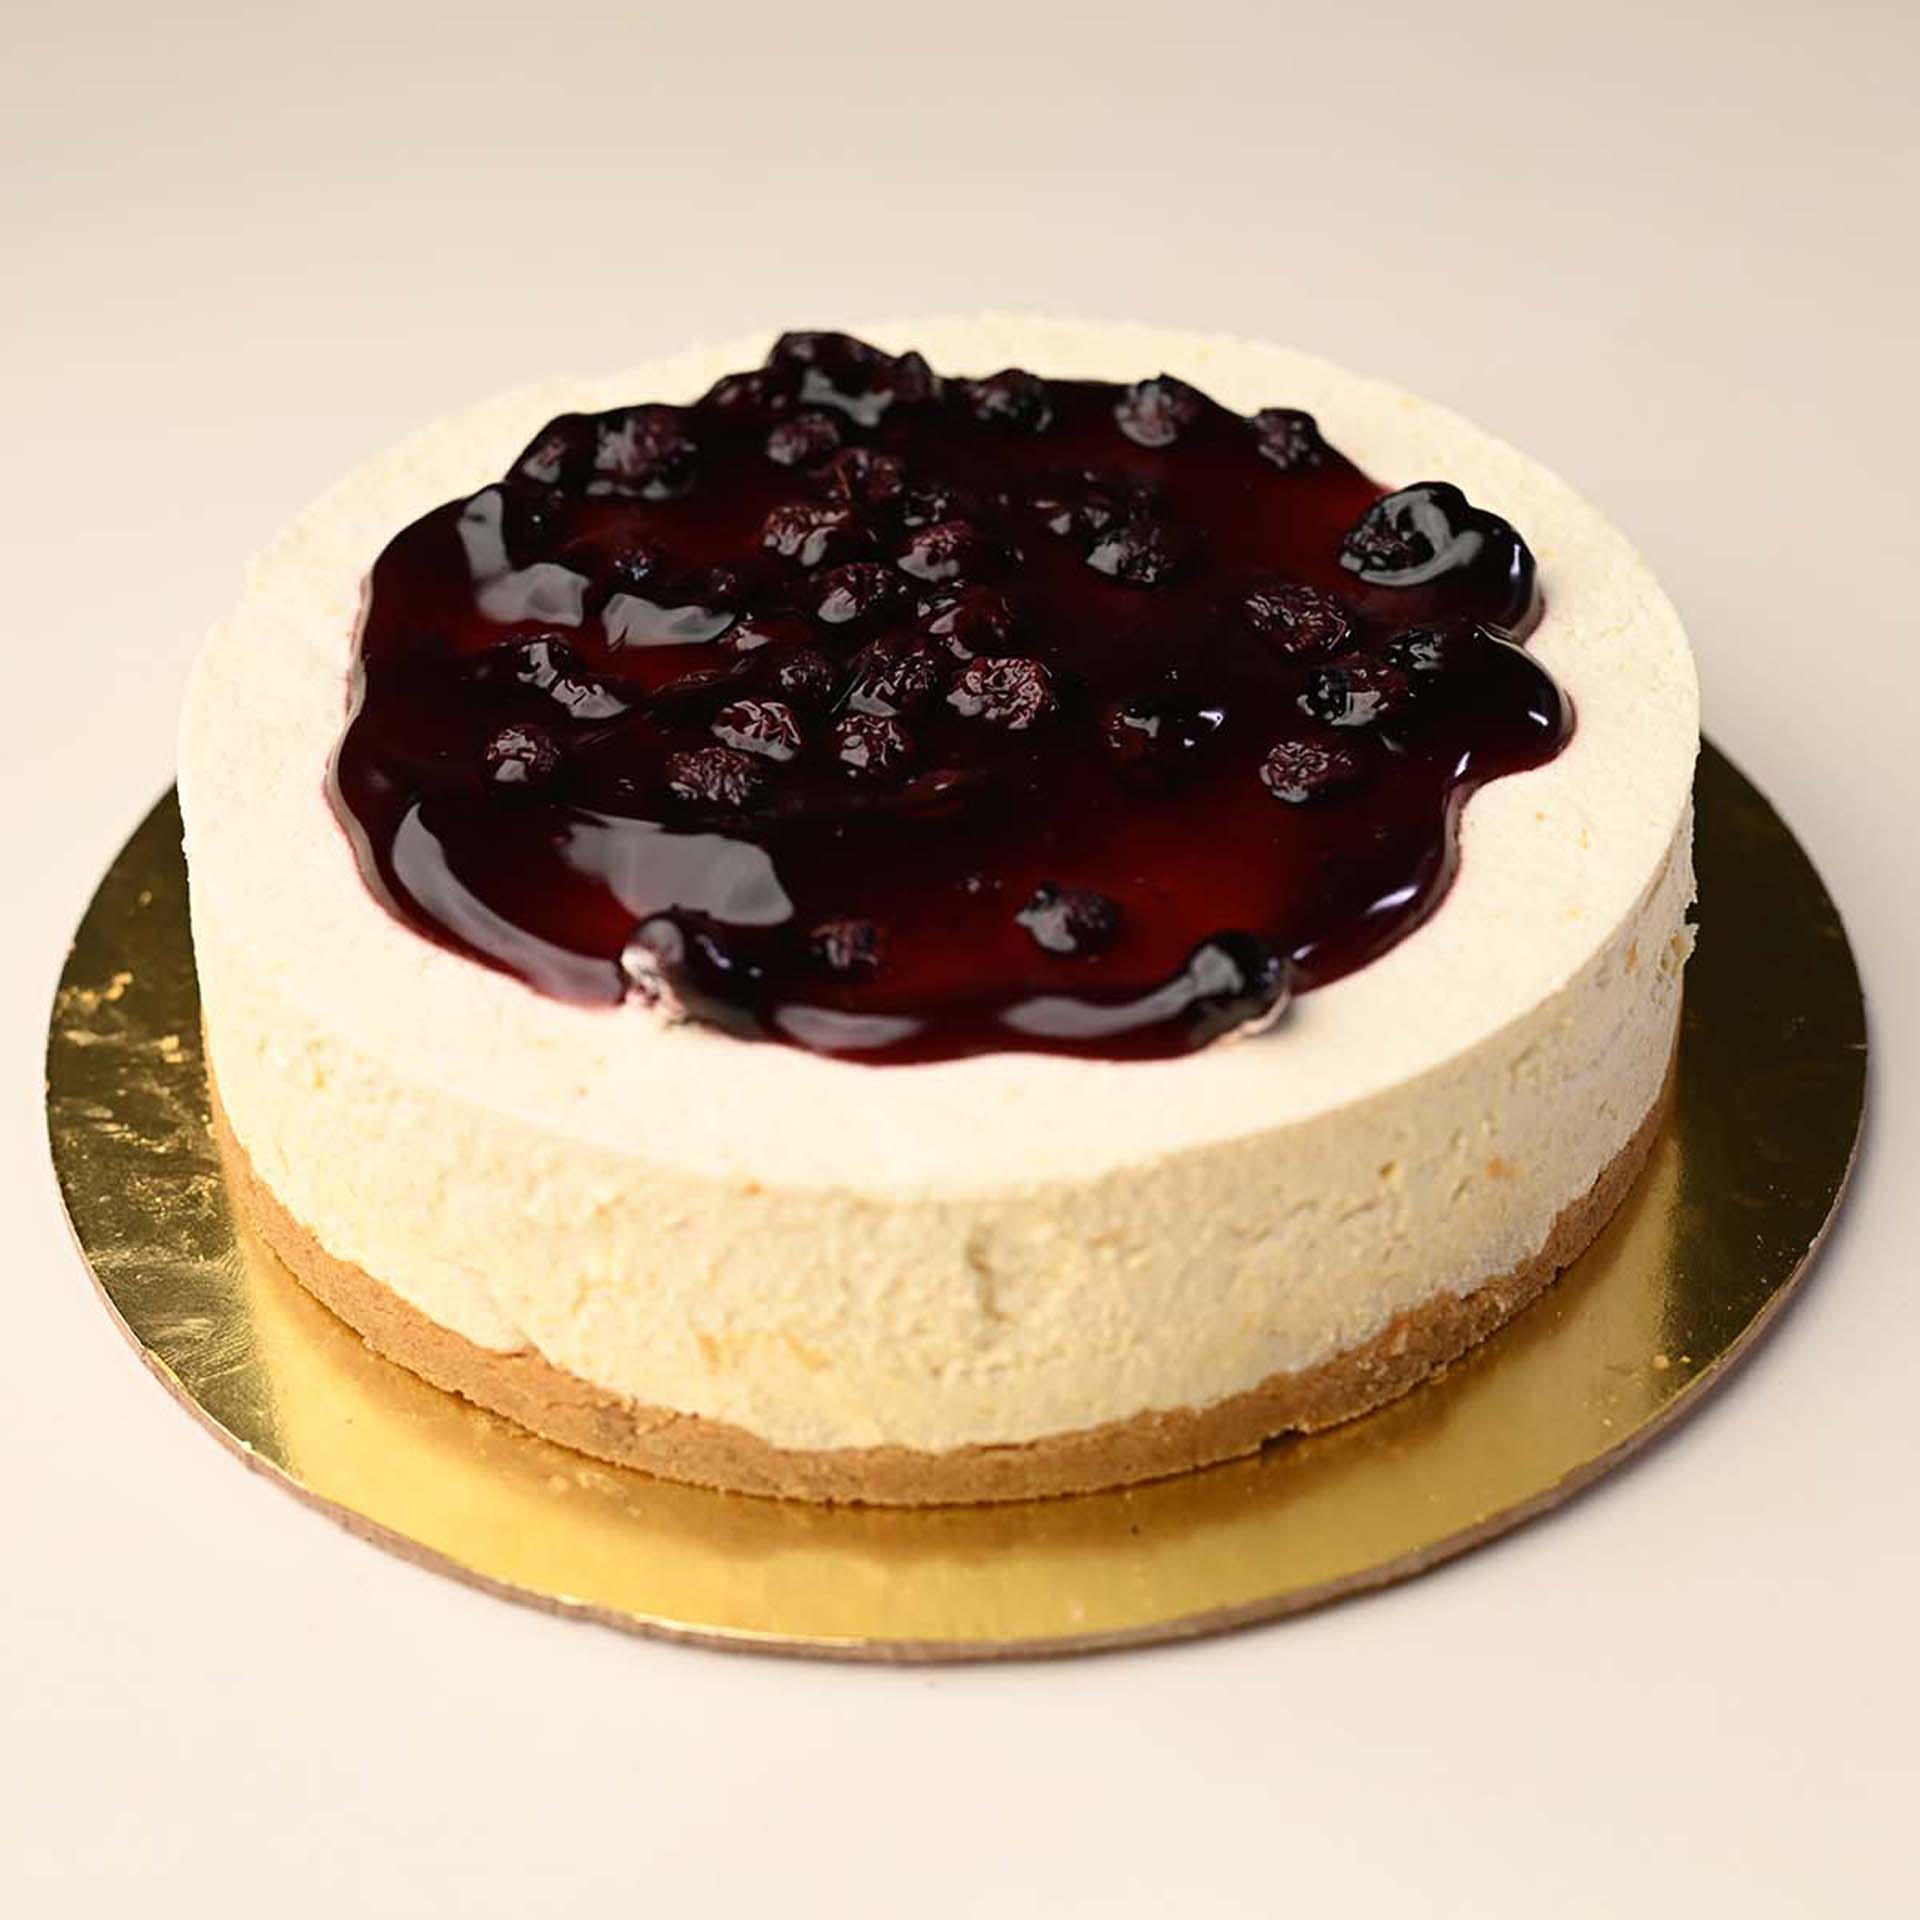 Blueberry Cheese cake